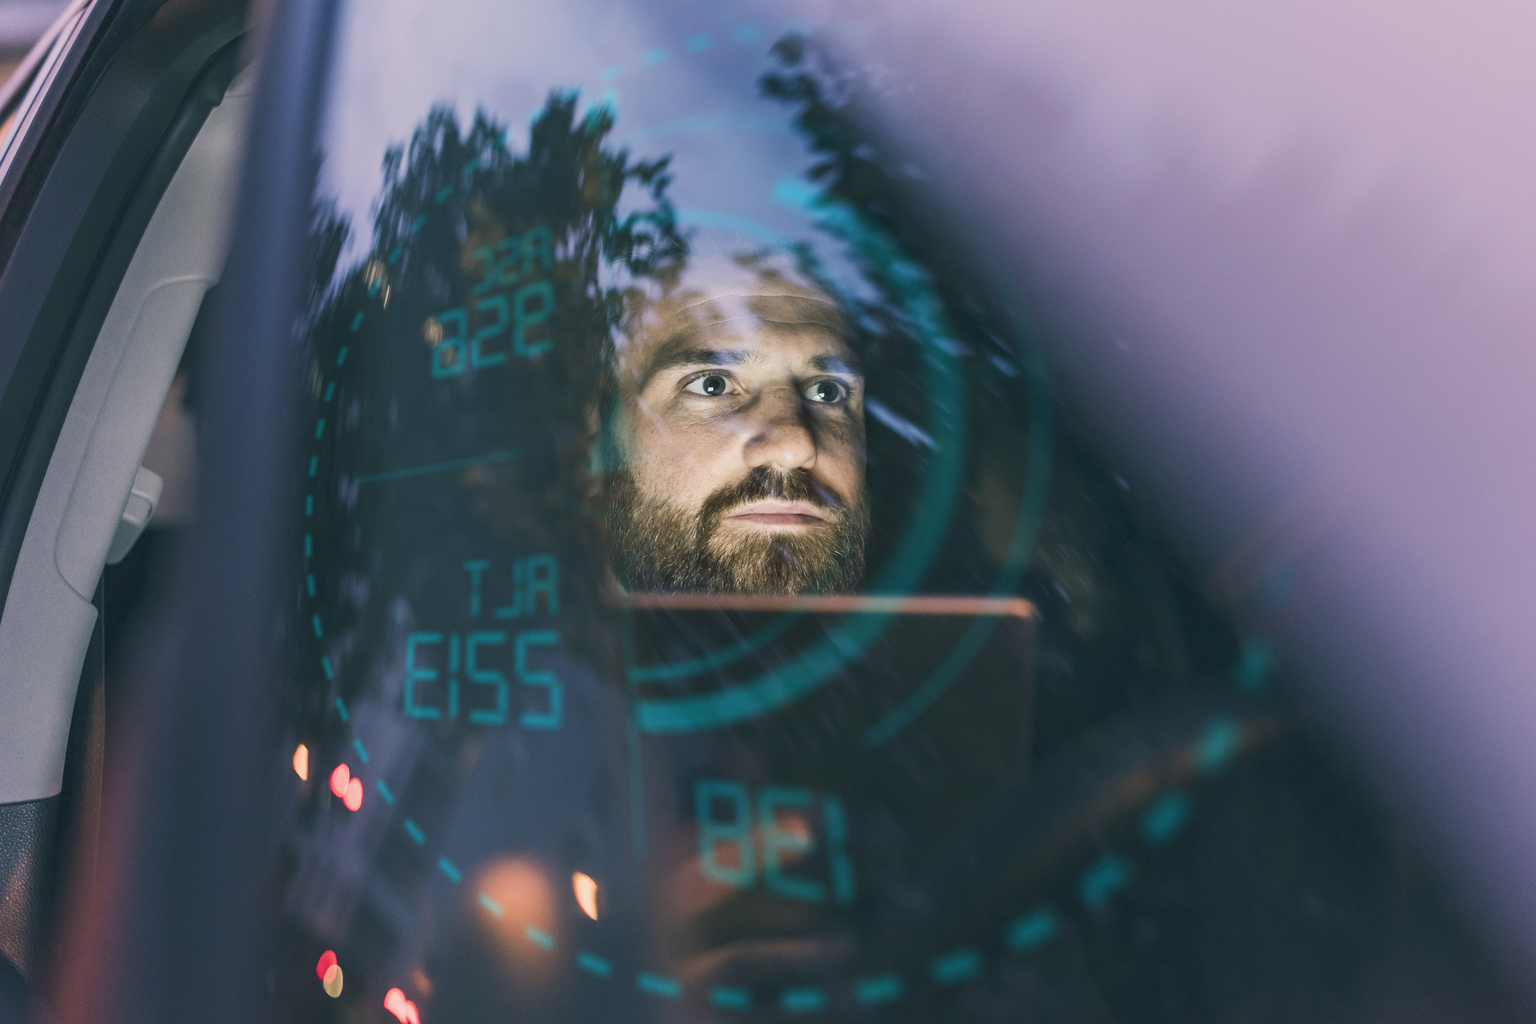 Focused man in car at night surrounded by dashboard projection